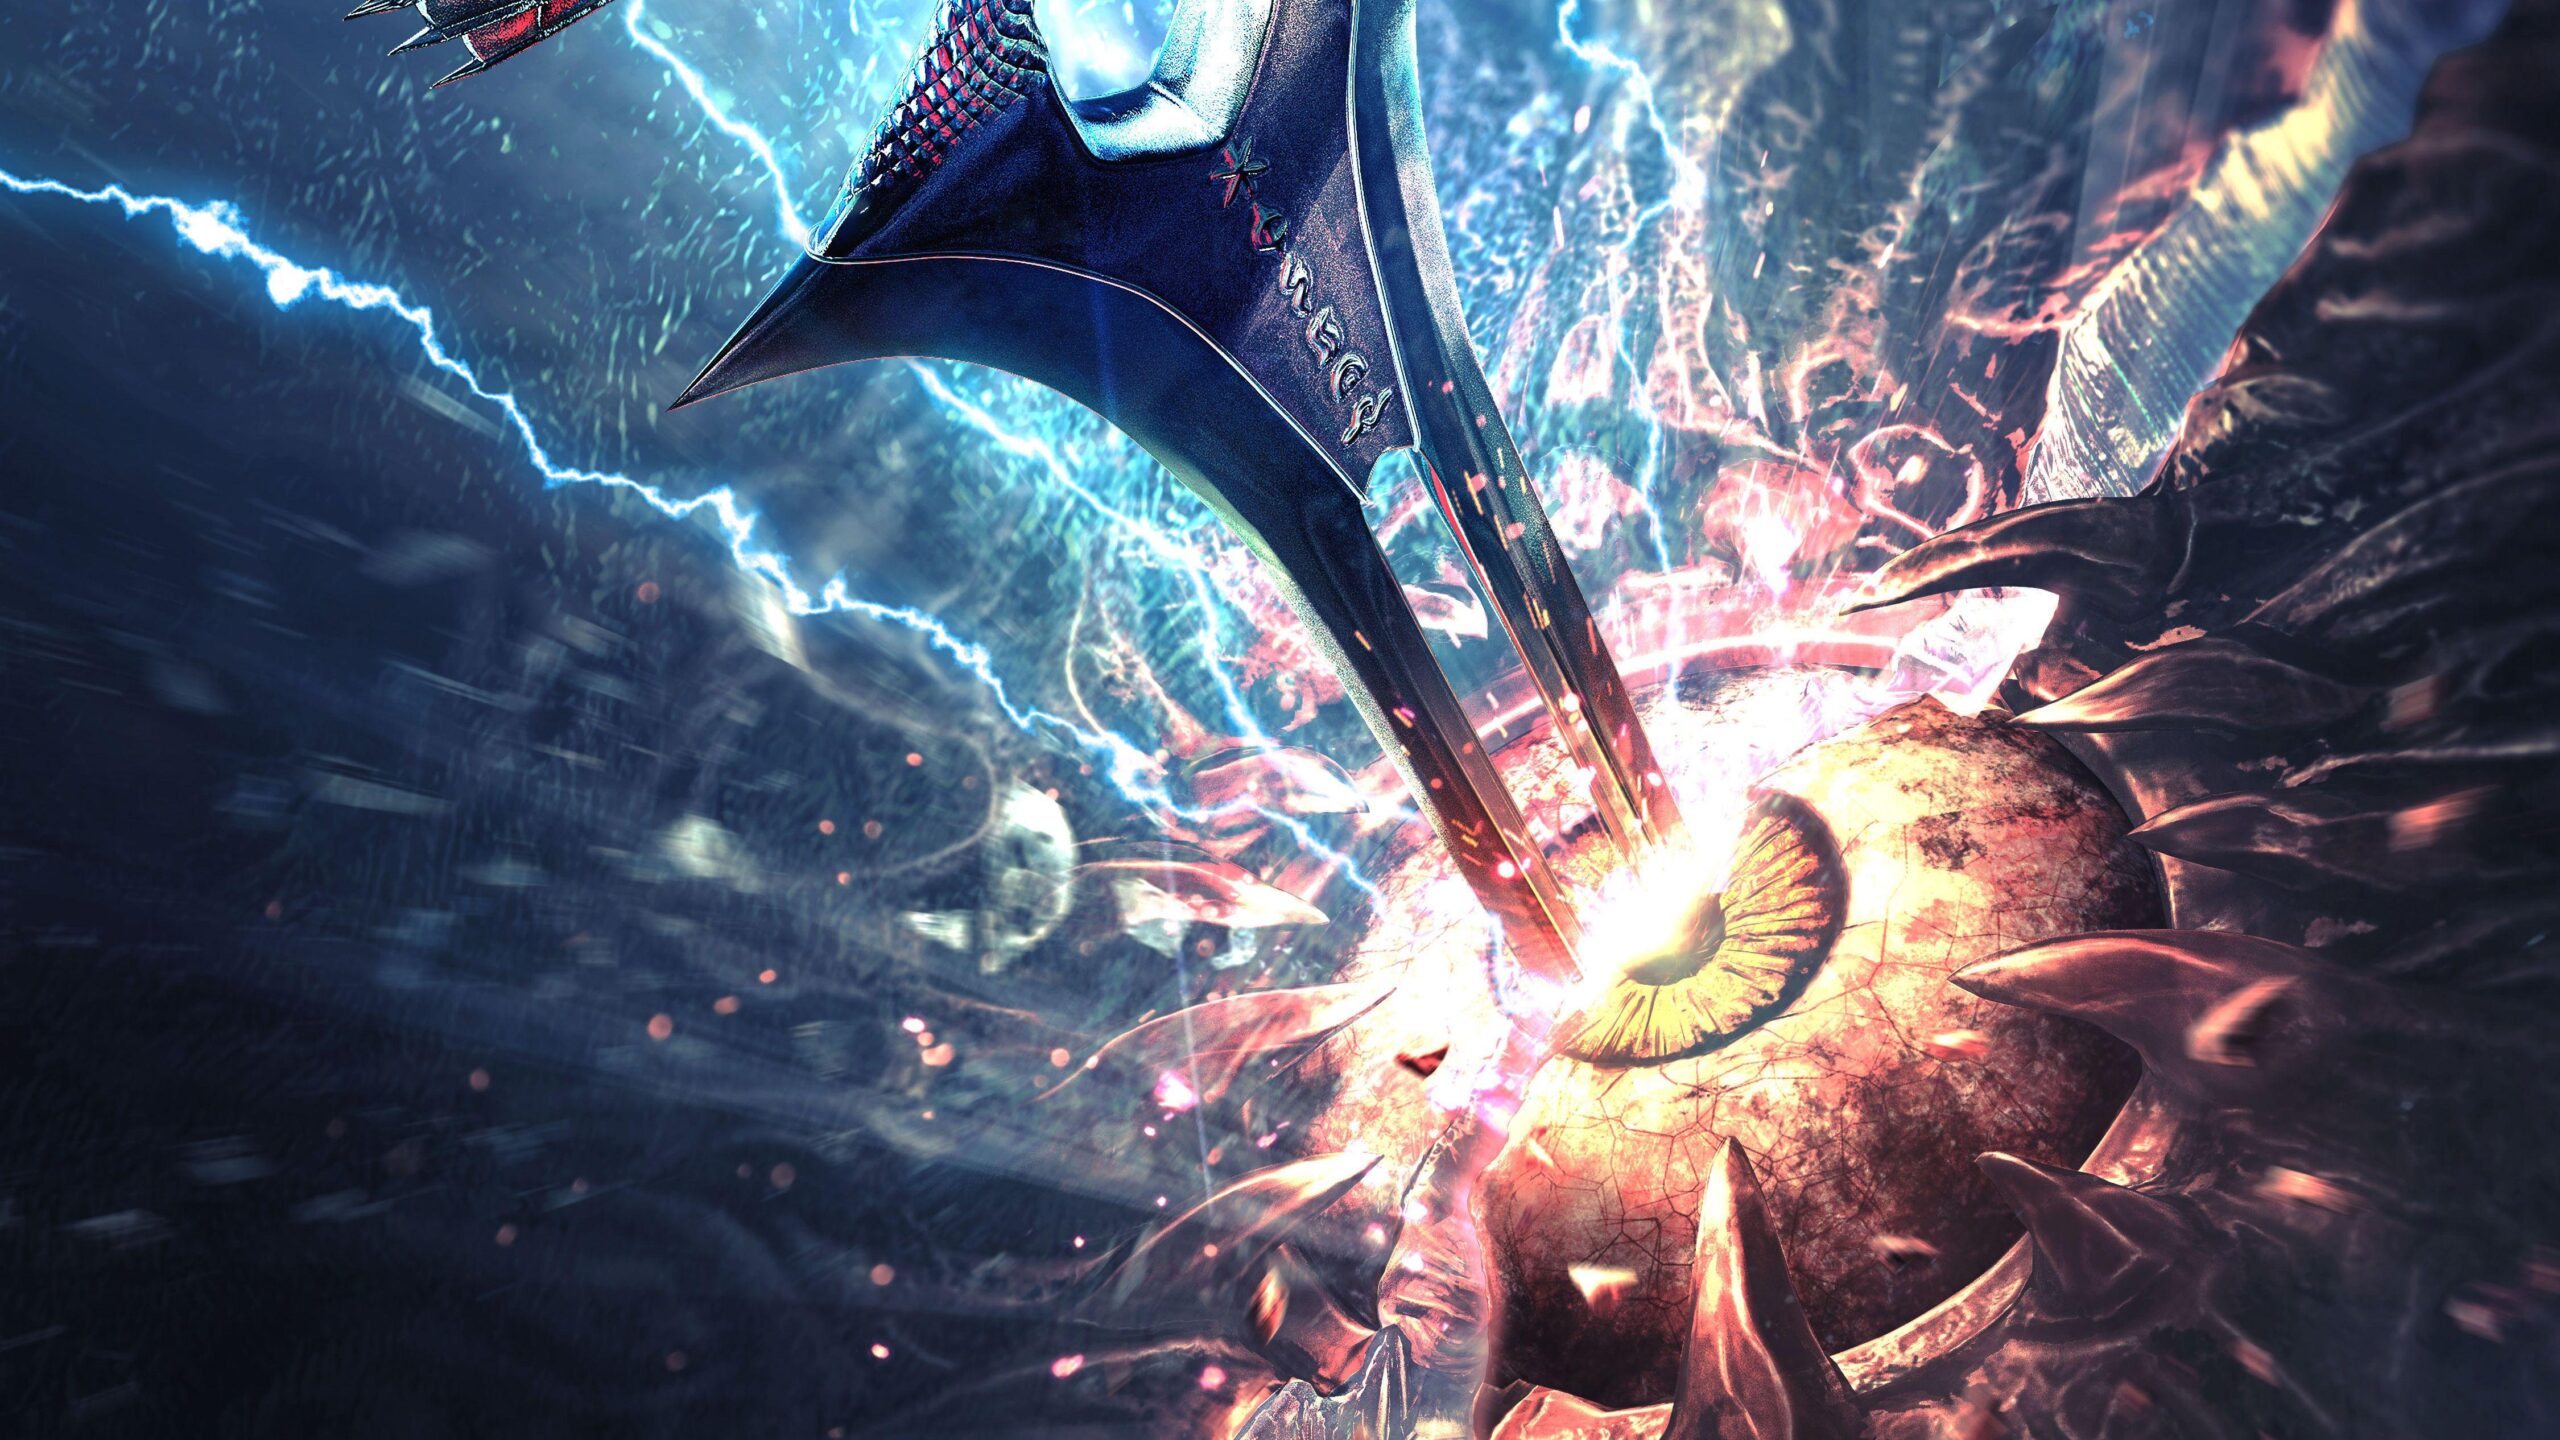 Soulcalibur Wallpapers For Free, Soulcalibur, Game